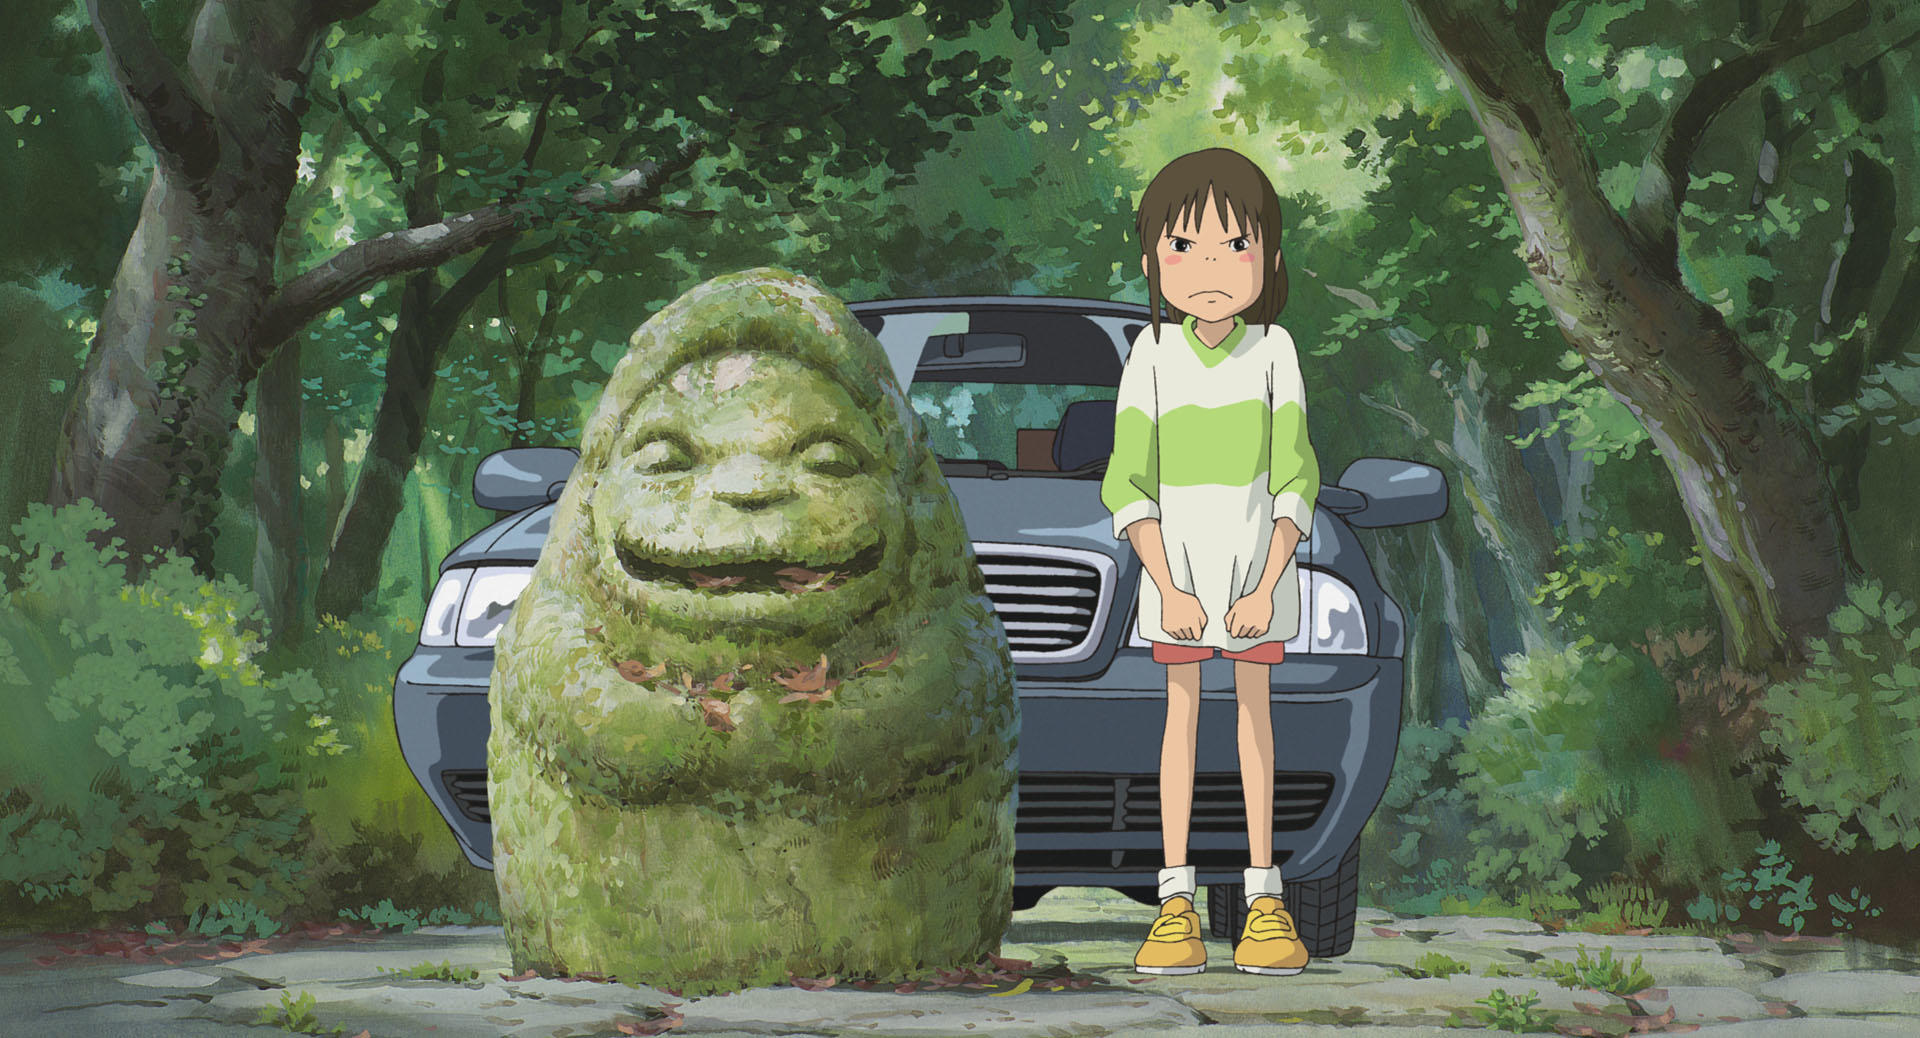 You Can Download More Than 1,000 Studio Ghibli Still Images for Free